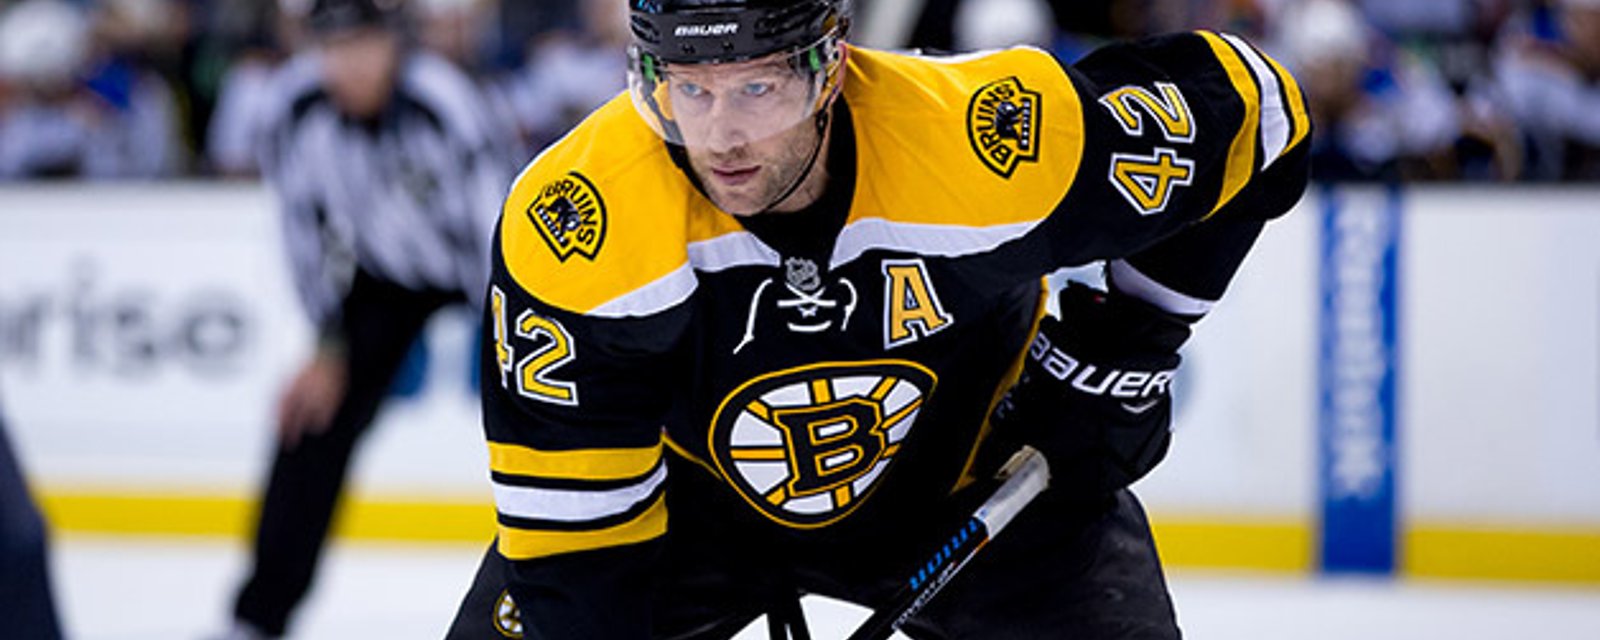 Backes slated to be scratched as Bruins make lineup changes ahead of tonight's game 